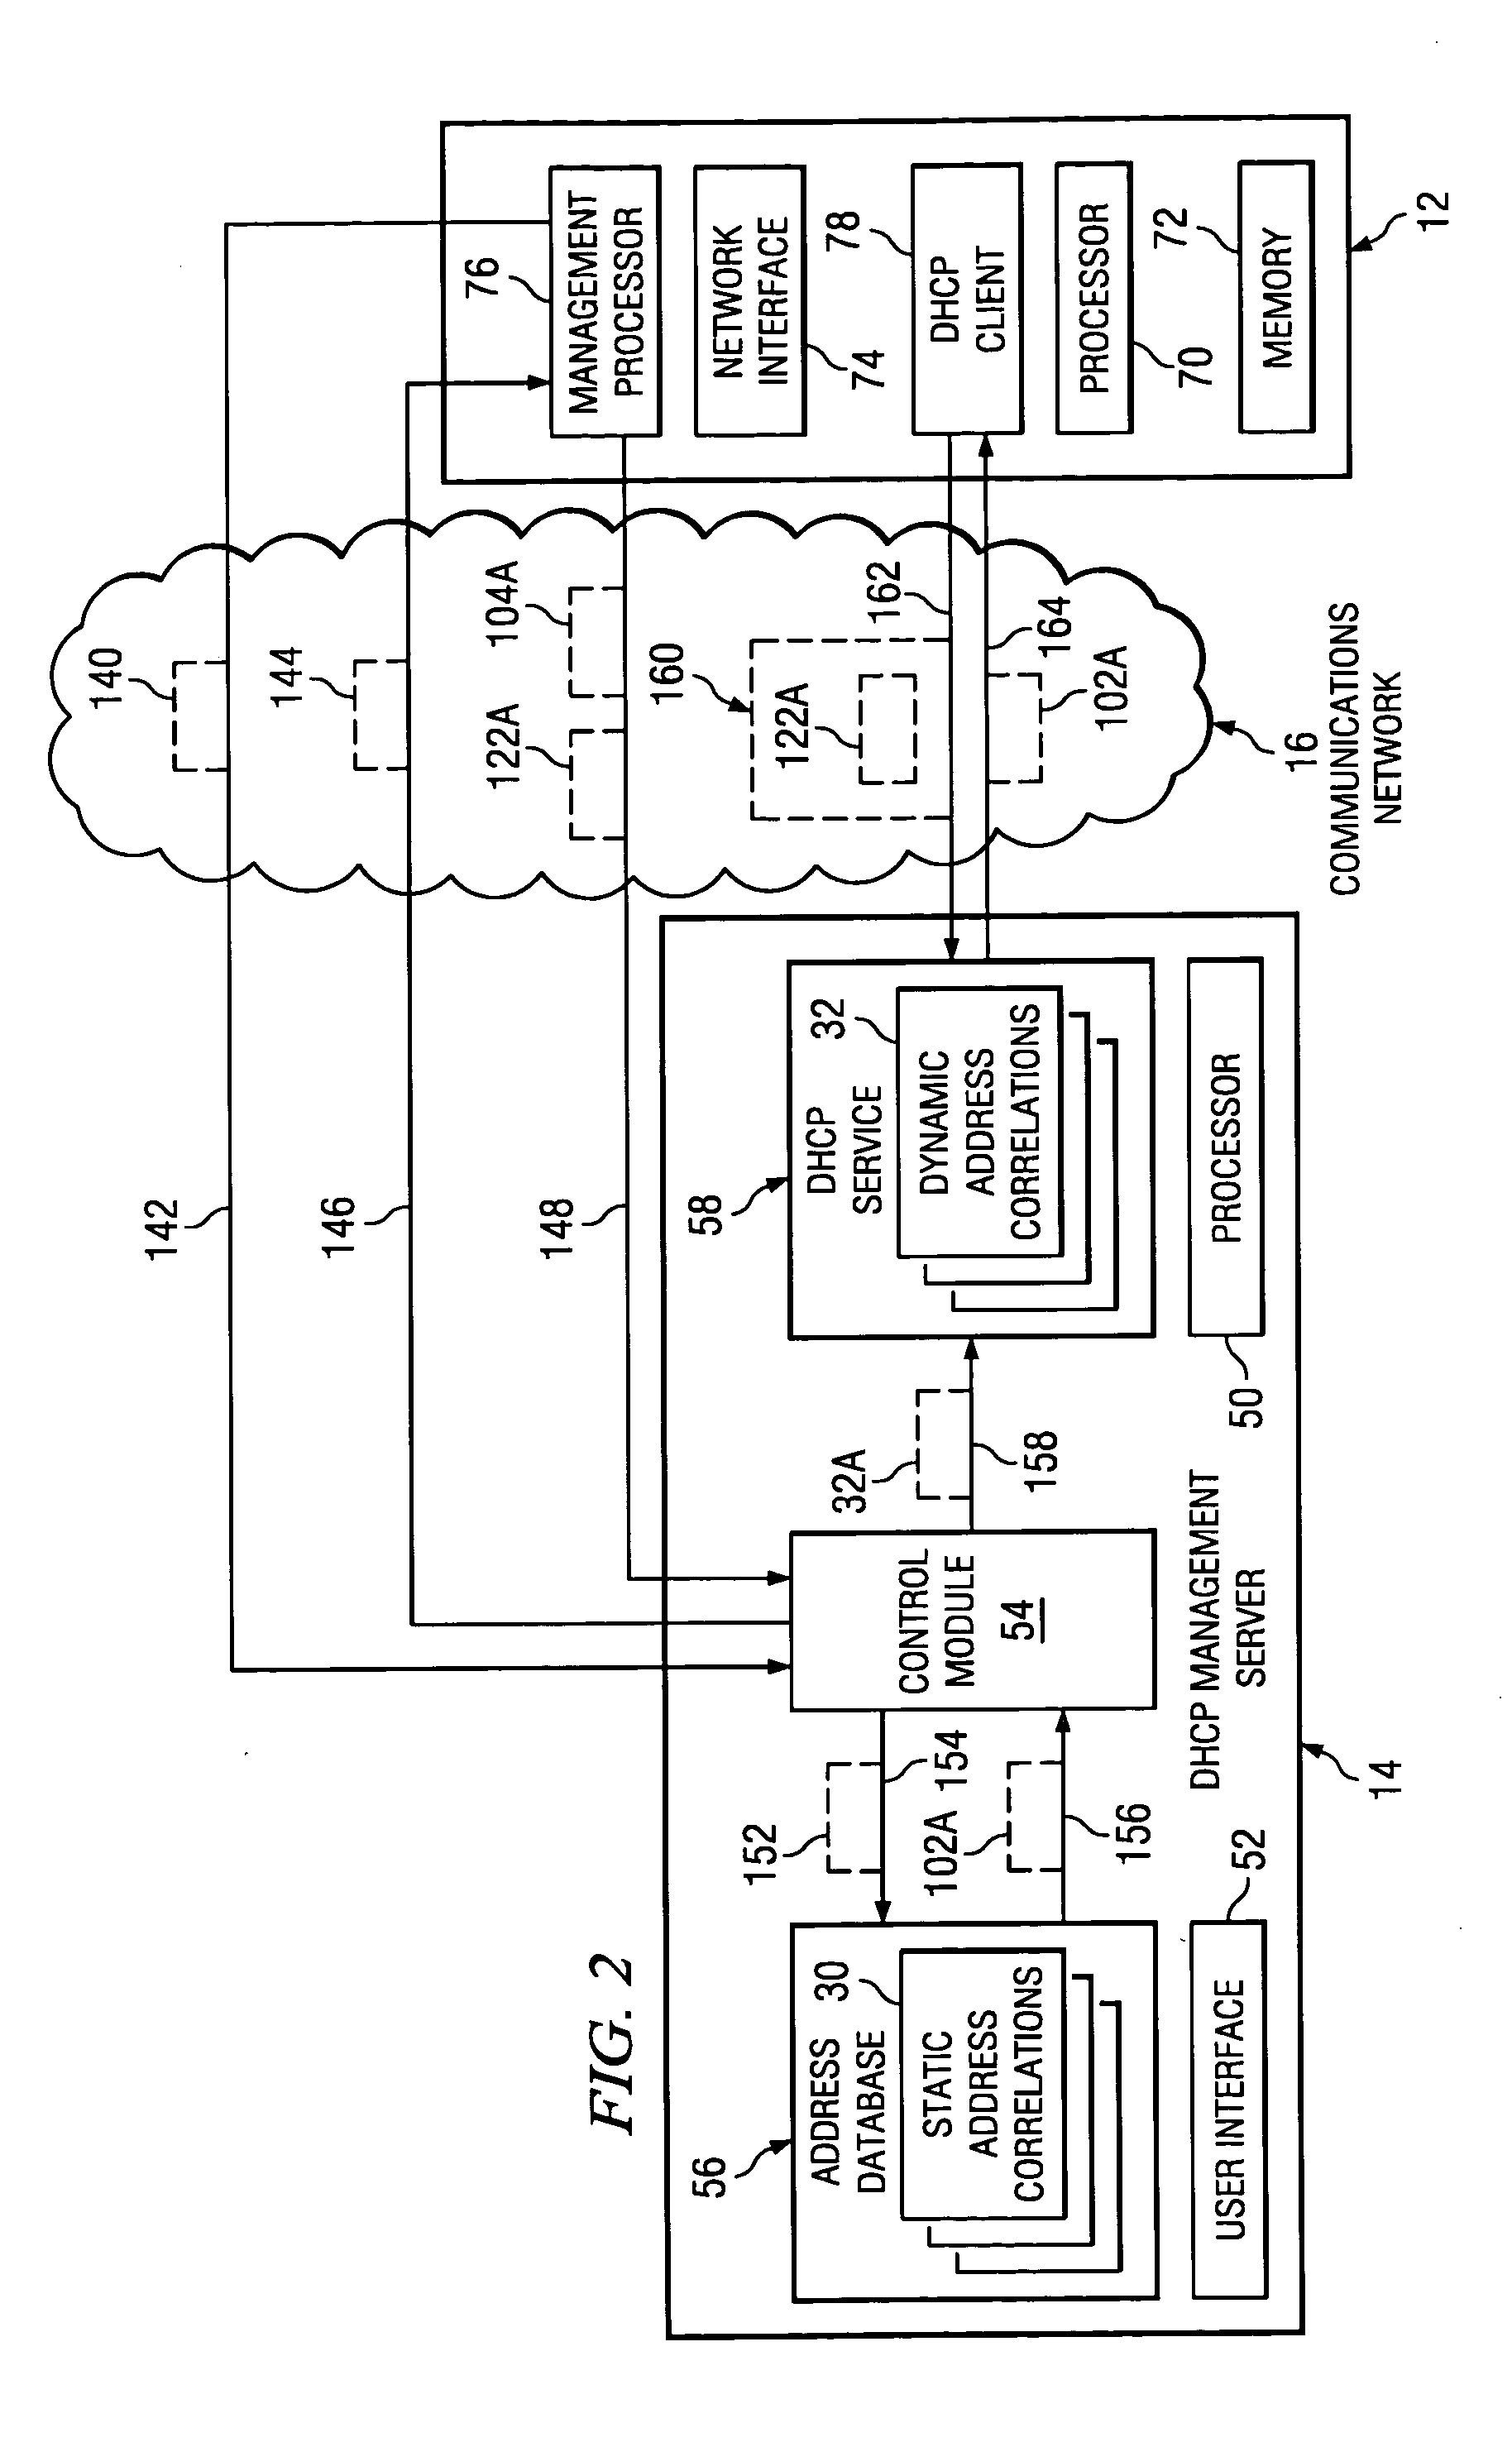 System and method for DHCP-based assignment of IP addresses to servers based on geographic identifiers